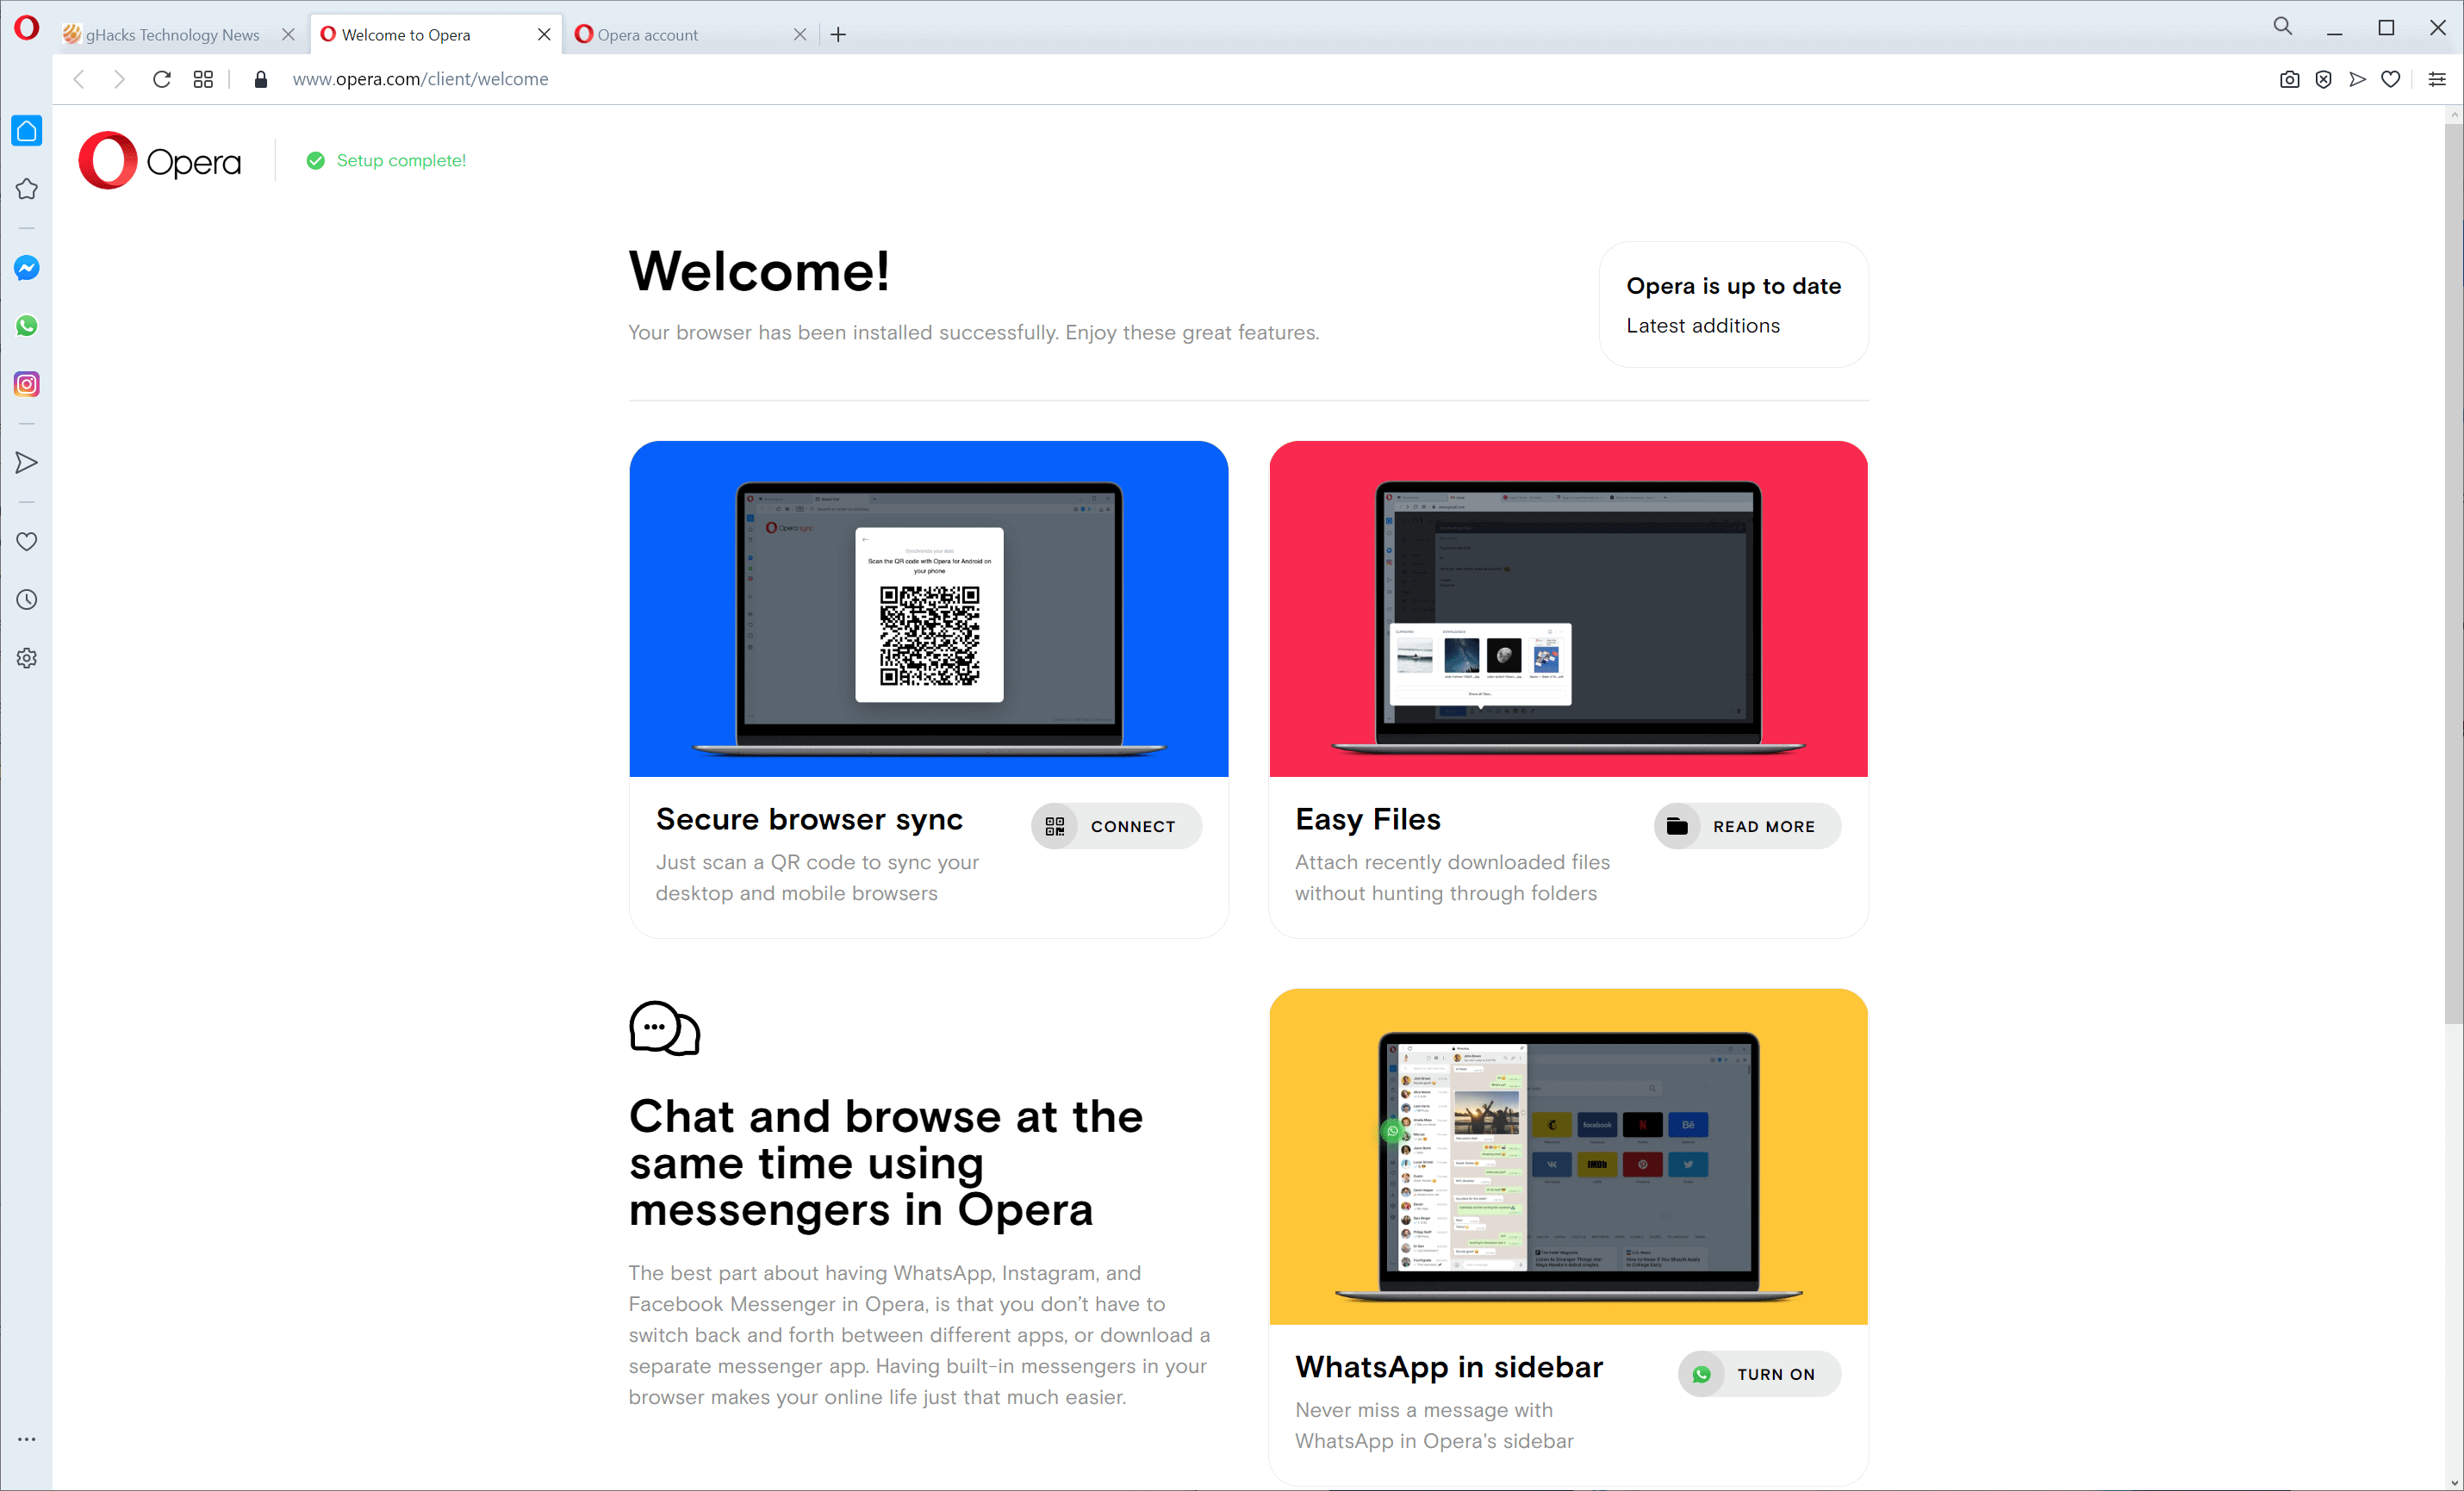 opera browser sync improved